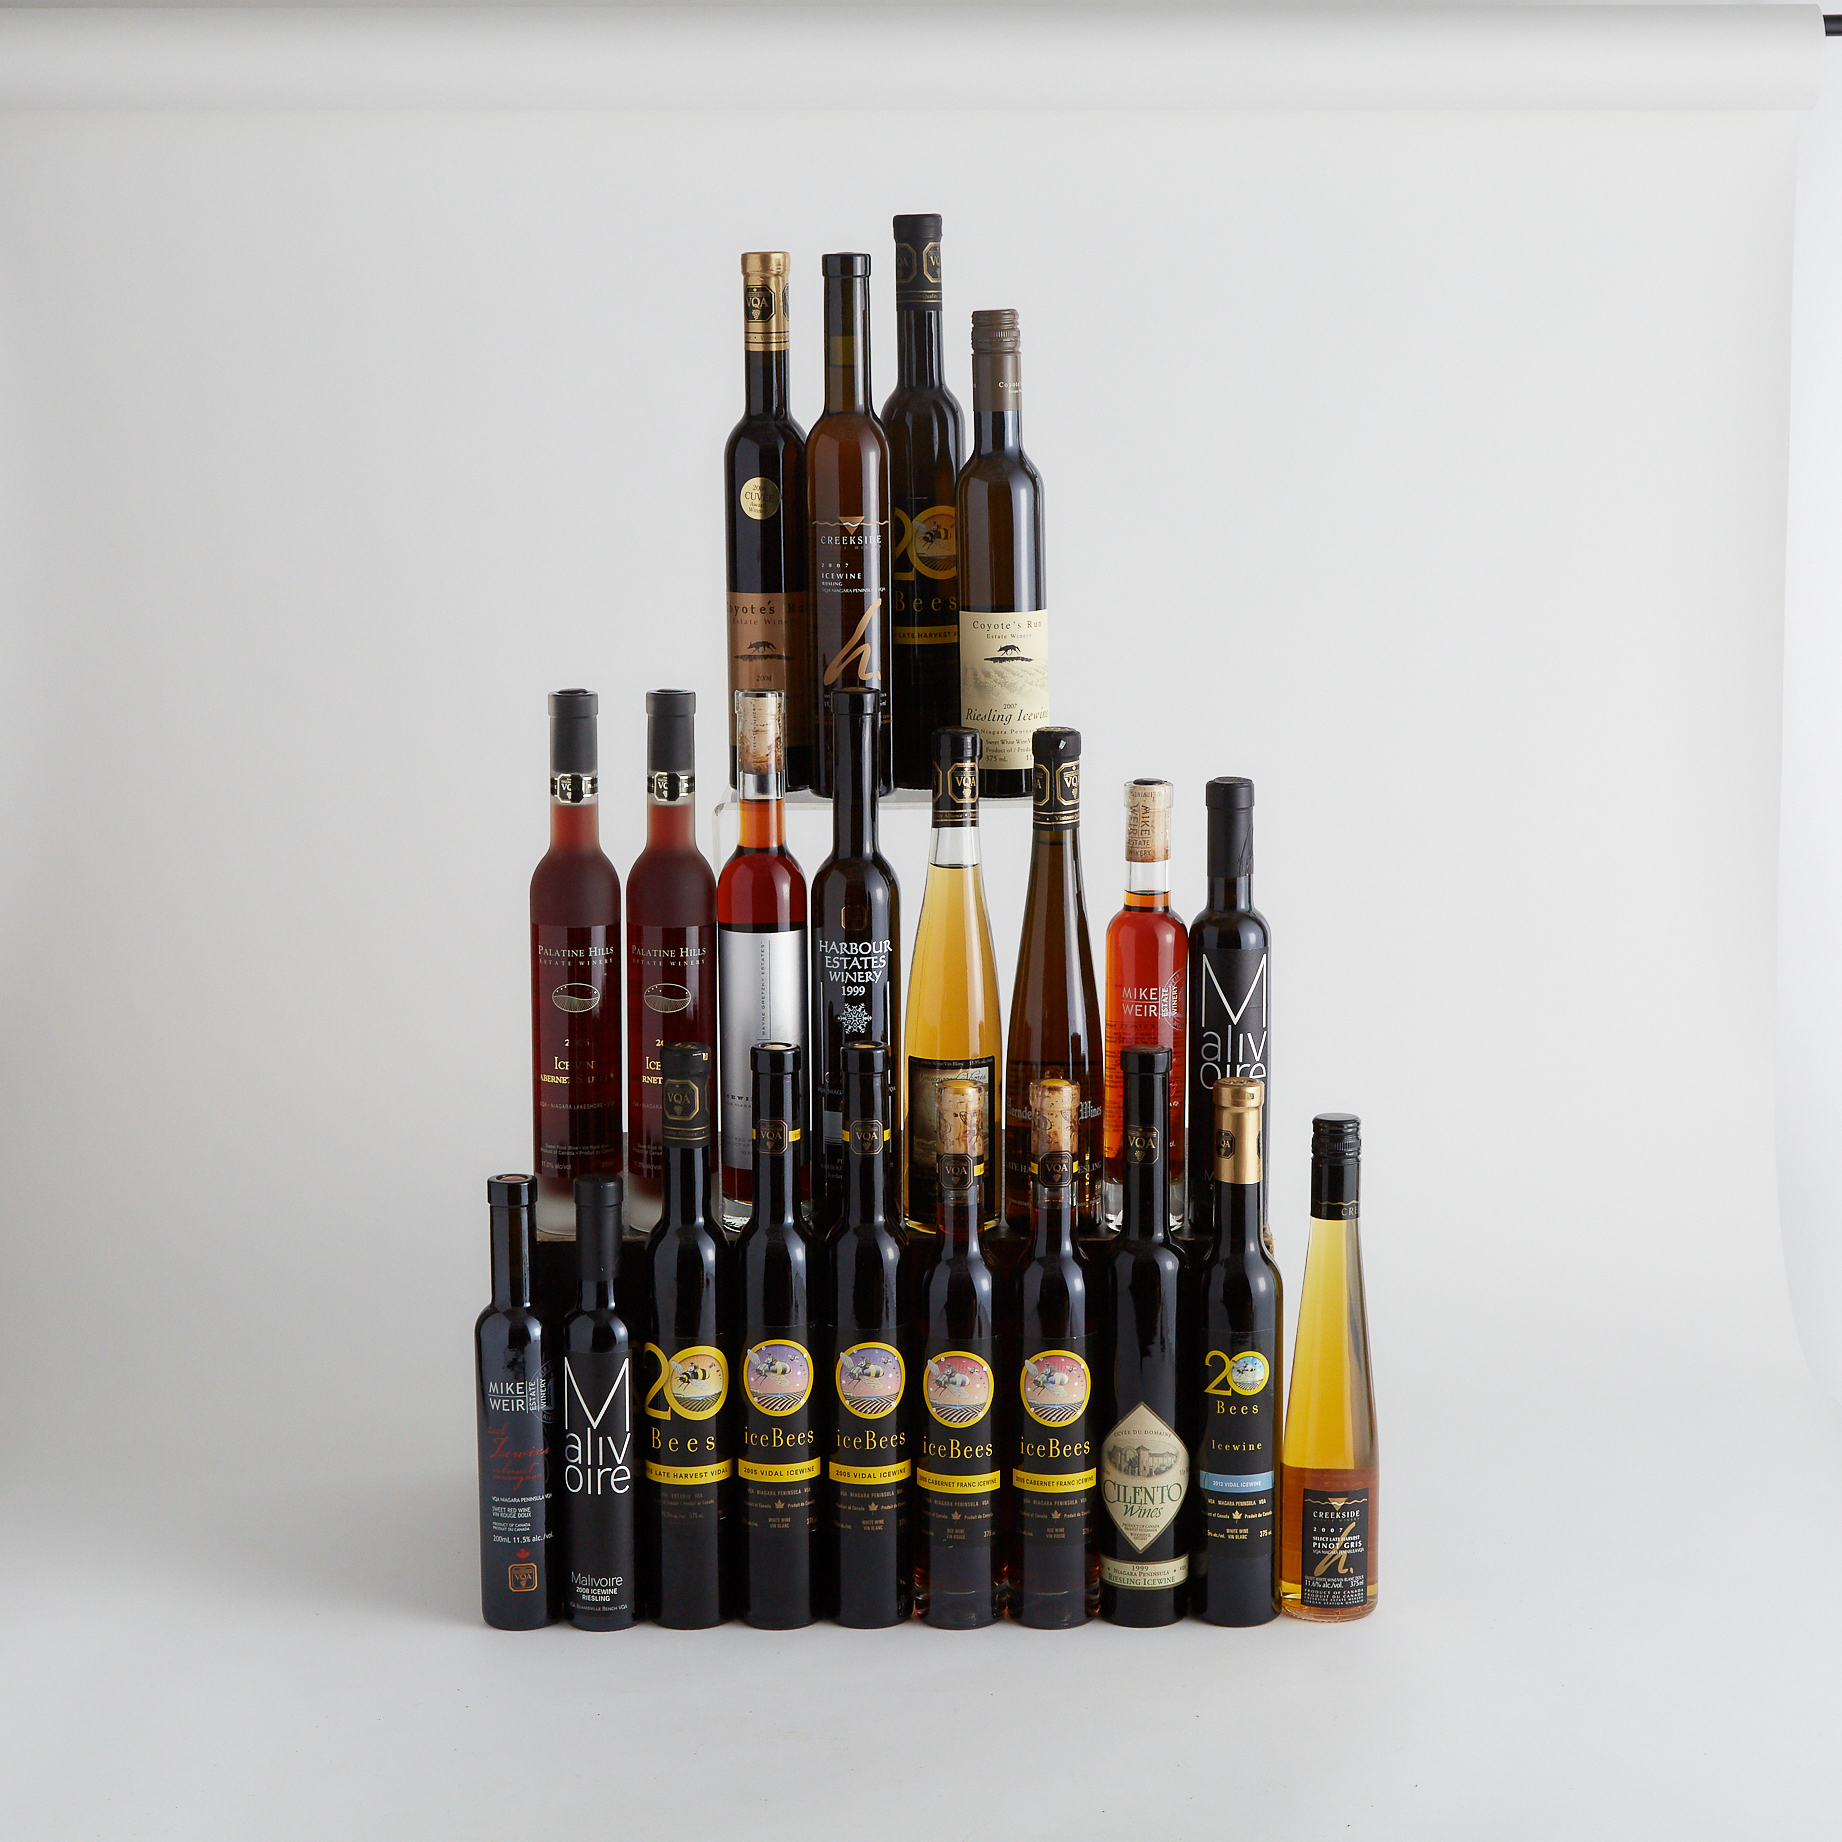 20 BEES ICE BEES CABERNET FRANC ICEWINE 2005 (2 HF. BT.)
20 BEES ICE BEES VIDAL ICEWINE 2005 (2 HF. BT.)
20 BEES VIDAL ICEWINE 2012 (1 HF. BT.)
20 BEES VIDAL LATE HARVEST 2006 (2 HF. BT.)
CILENTO WINES RIESLING ICEWINE 1999 (1 HF. BT.)
COYOTE'S RUN ESTATE WINERY RIESLING ICEWINE 2004 (1 HF. BT.)
COYOTE'S RUN ESTATE WINERY RIESLING ICEWINE 2007 (1 HF. BT.)
CREEKSIDE ESTATE WINERY PINOT GRIS SELECT LATE HARVEST 2007 (1 HF. BT.)
CREEKSIDE ESTATE WINERY RIESLING ICEWINE 2007 (1 HF. BT.)
HARBOUR ESTATES WINERY RIESLING ICEWINE 1999 (1 HF. BT.)
HERNDER ESTATES RIESLING LATE HARVEST 1996 (1 HF. BT.)
MALIVOIRE RIESLING ICEWINE 2008 (1 200 ML.)
MALIVOIRE RIESLING ICEWINE 2009 (1 200 ML.)
MIKE WEIR ESTATE WINERY CABERNET SAUVIGNON ICEWINE 2006 (1 200 ML.)
MIKE WEIR ESTATE WINERY CABERNET SHIRAZ ICEWINE 2006 (1 200 ML.)
PALATINE HILLS ESTATE WINERY CABERNET SAUVIGNON ICEWINE 2006 (2 HF. BT.)
SPRUCEWOOD WINES RIESLING TRAMINER VIDAL LATE HARVEST 2007 (1 HF. BT.)
WAYNE GRETSKY ESTATES SHIRAZ ICEWINE 2006 (1 HF. BT.)